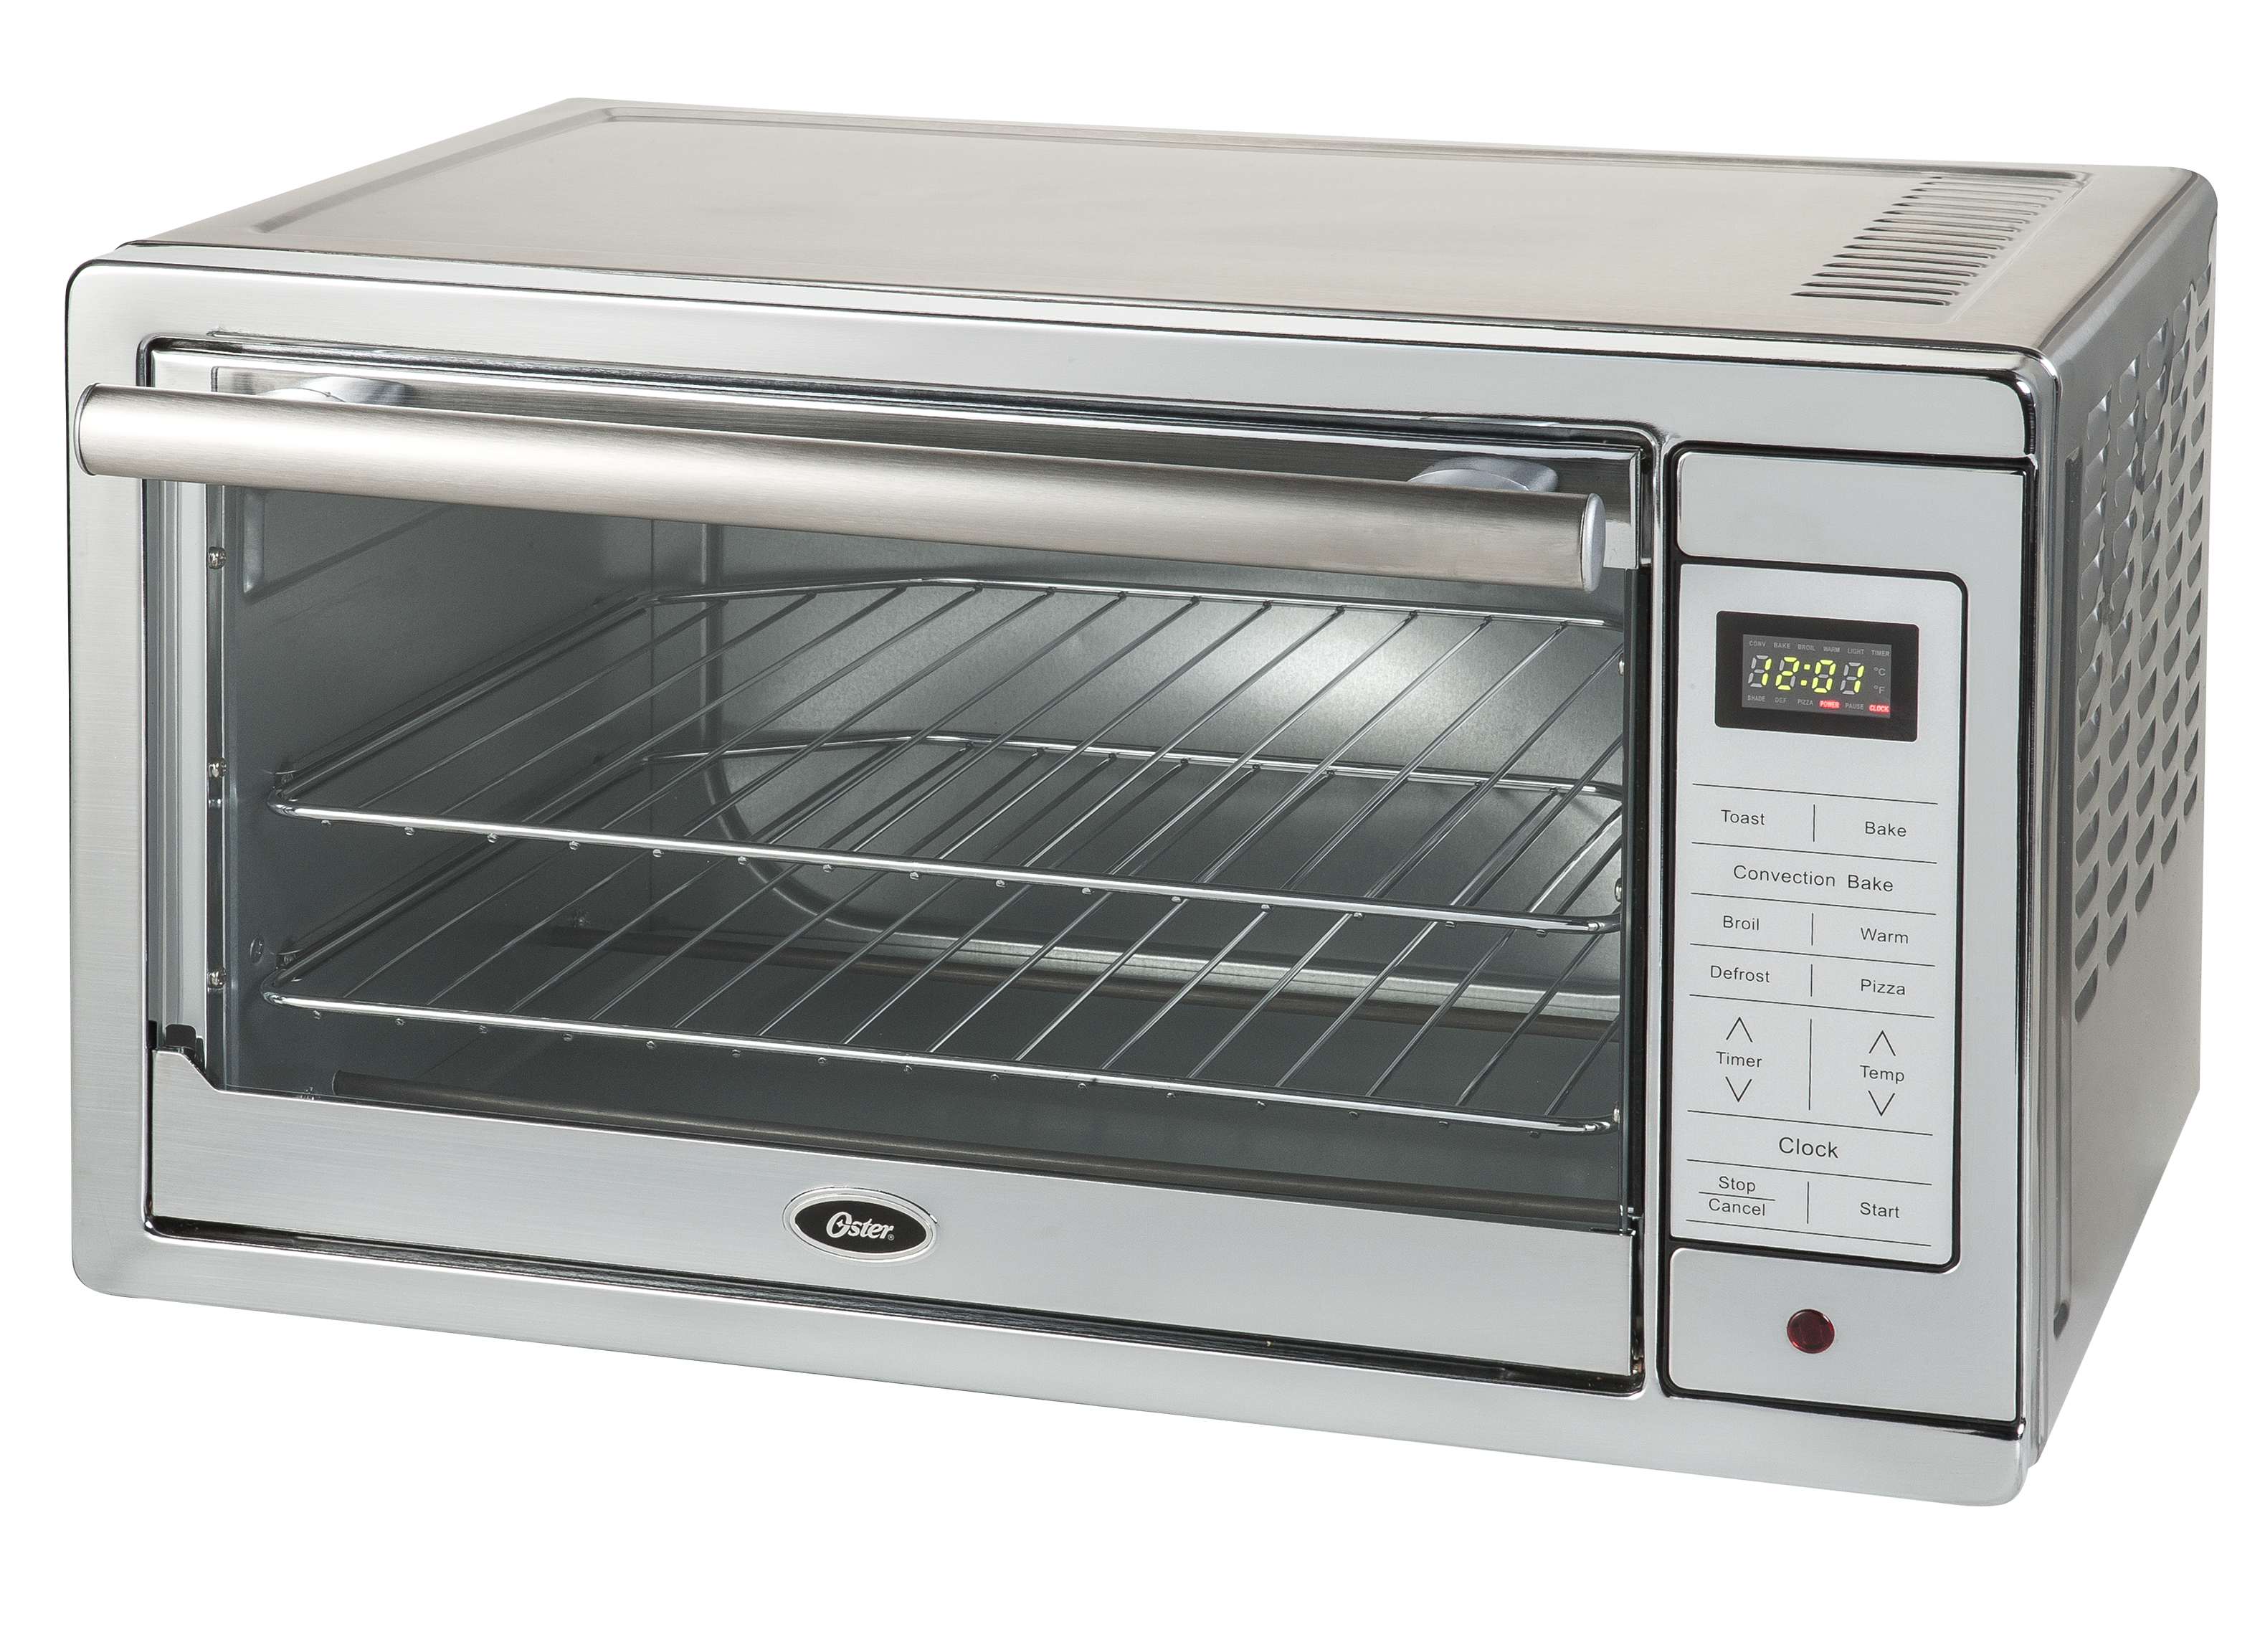 Oster Extra Large Countertop Oven #TSSTTVXLDG-001 Review  Countertop oven, Countertop  convection oven, Convection toaster oven